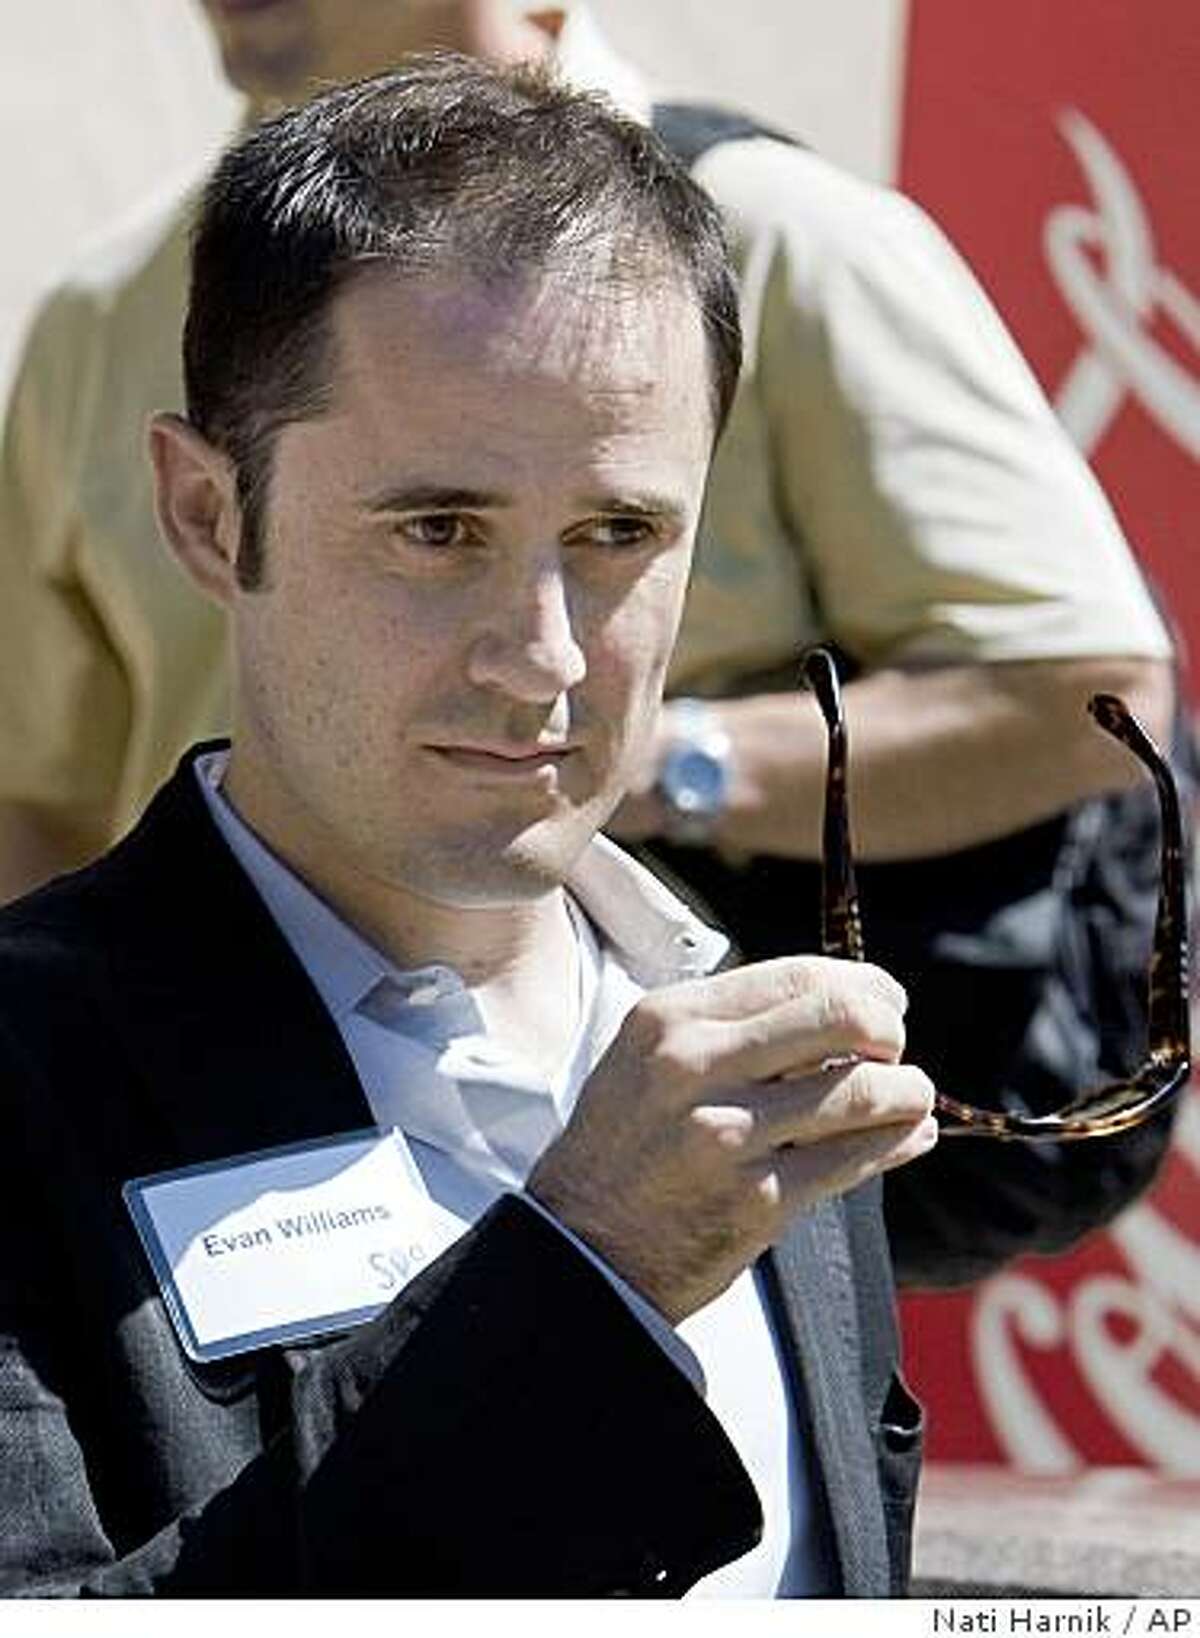 Twitter CEO and co-founder Evan Williams breaks for lunch at the annual Allen & Co.'s media summit in Sun Valley, Idaho, Friday, July 10, 2009. (AP Photo/Nati Harnik)